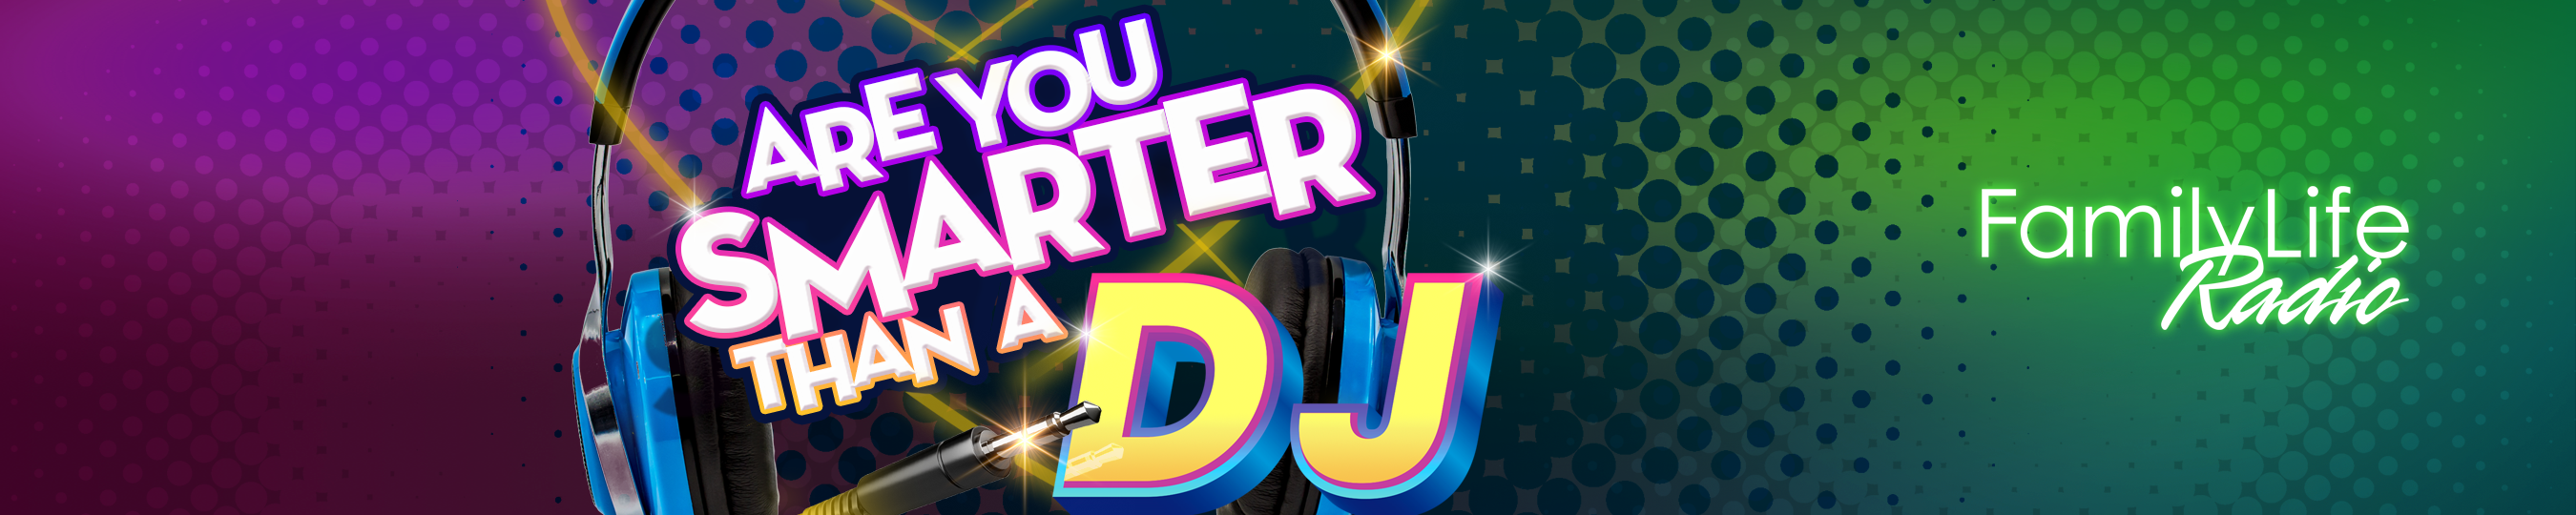 Are You Smarter than a DJ